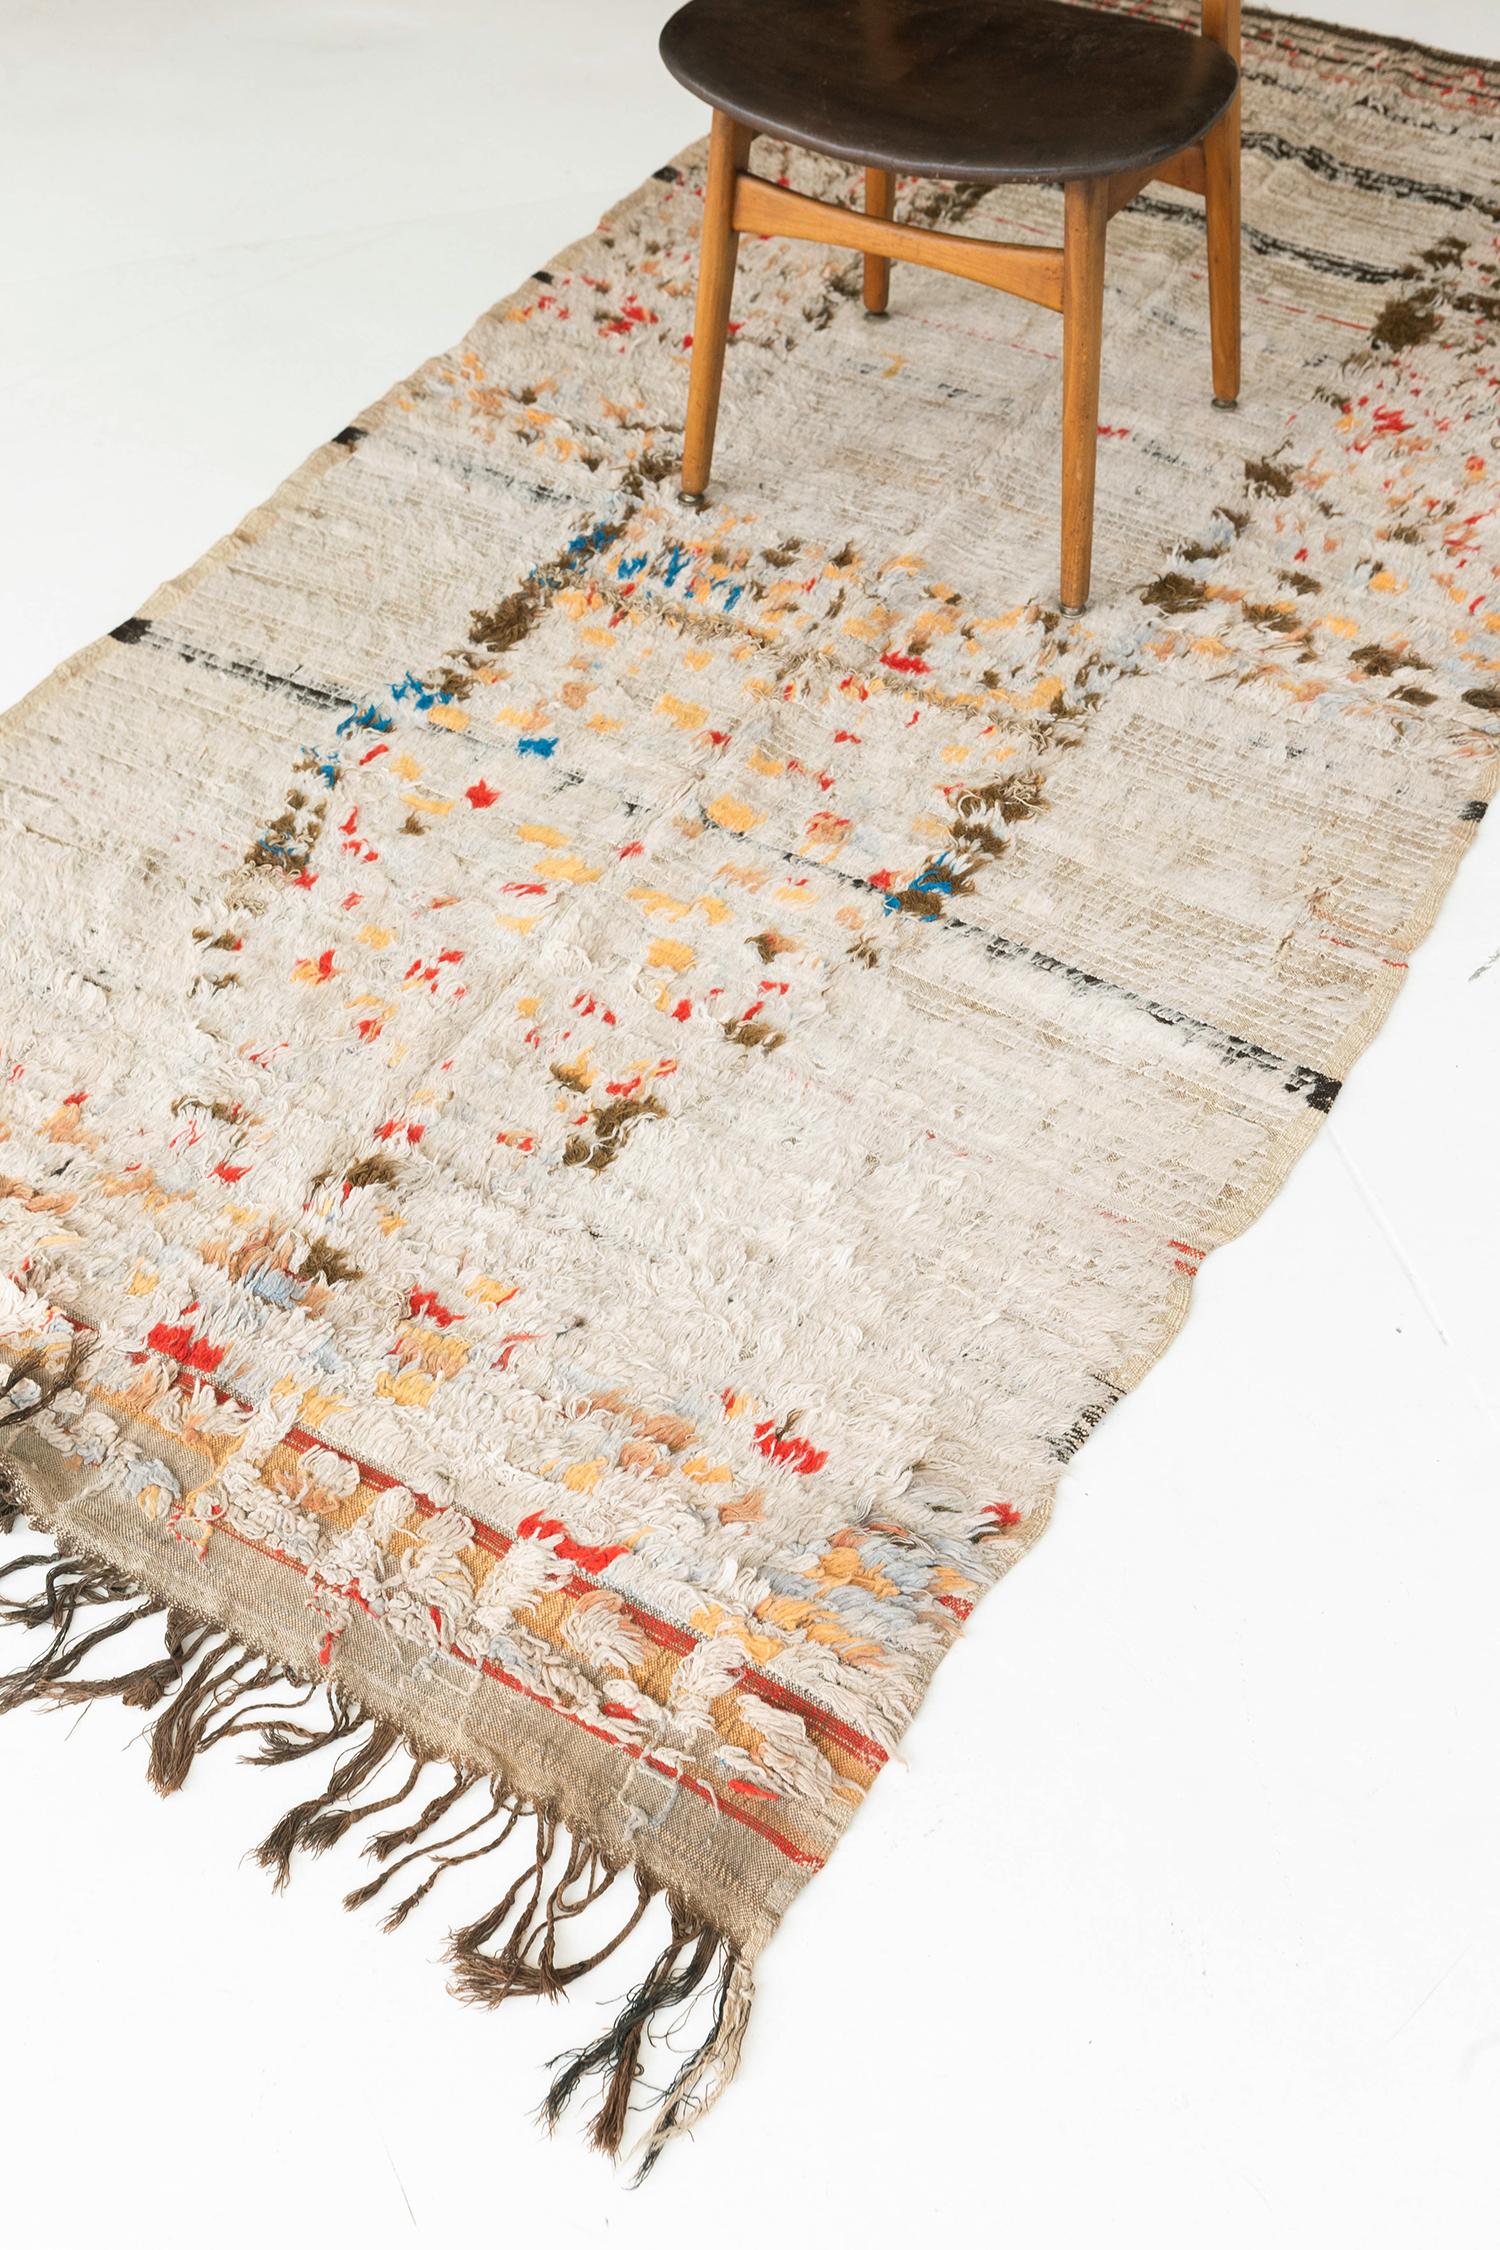 Blending its primitive charm and ancient symbolism, this Antique Moroccan High Atlas Tribe rug features an abstract pattern of the Berber culture. Through the ambiguous vibrant elements that come together into a network in a hygge and elegant